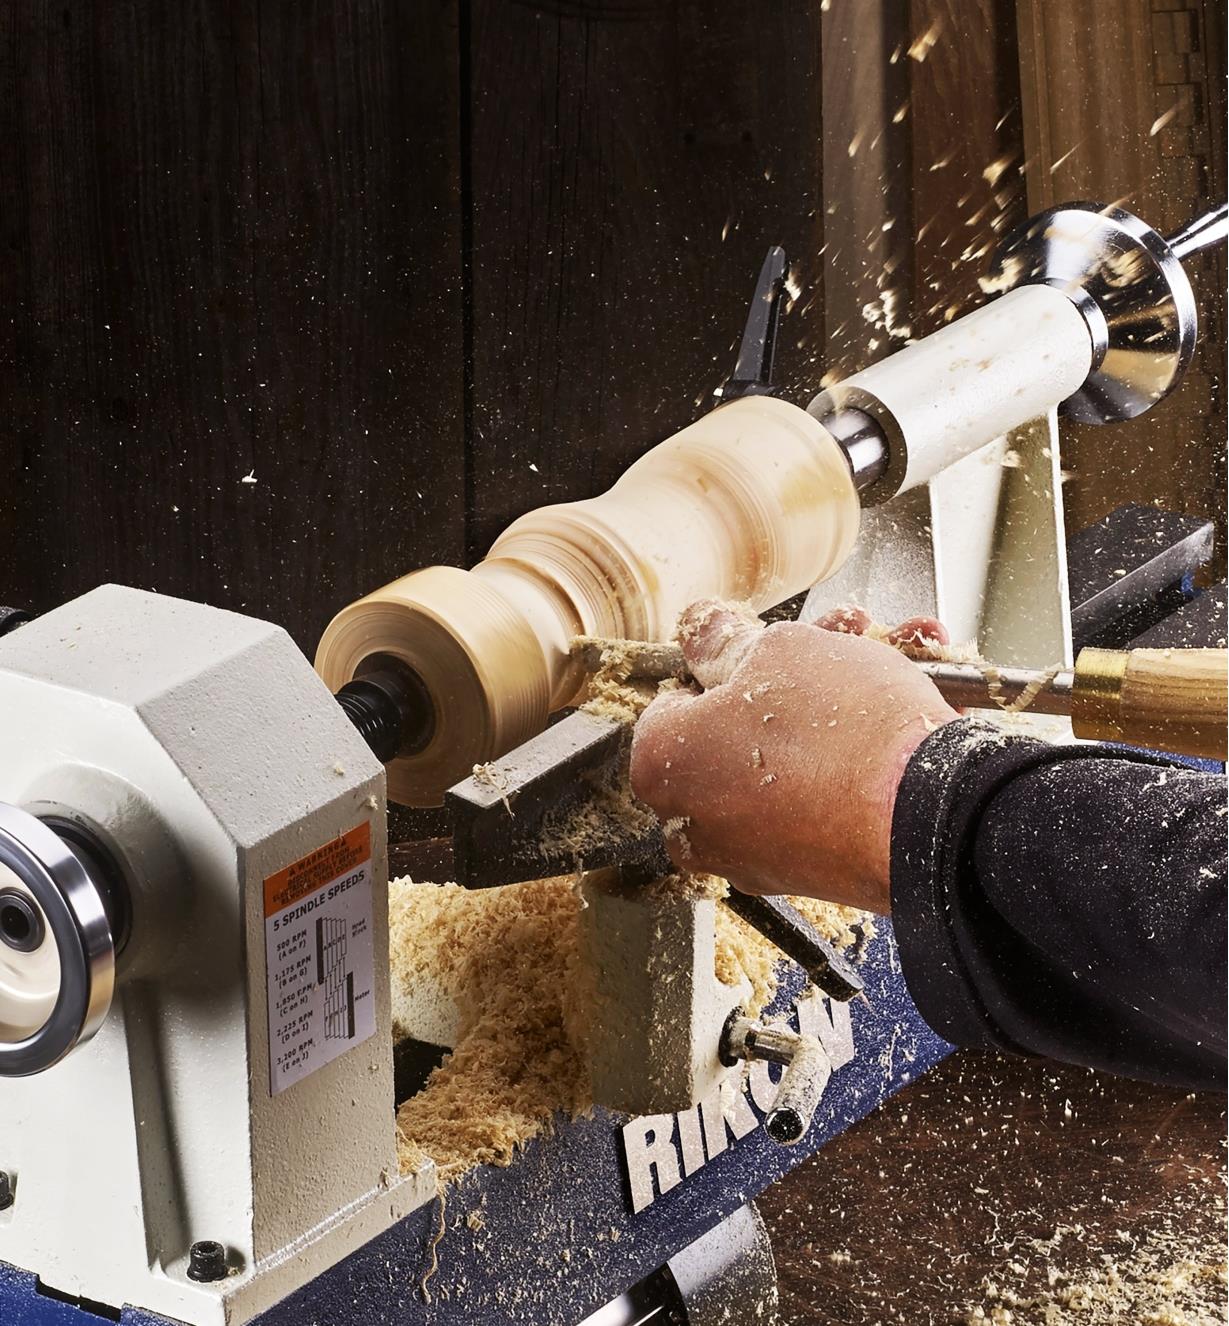 A woodworker turns a peppermill on a Rikon model 70-105 mini lathe